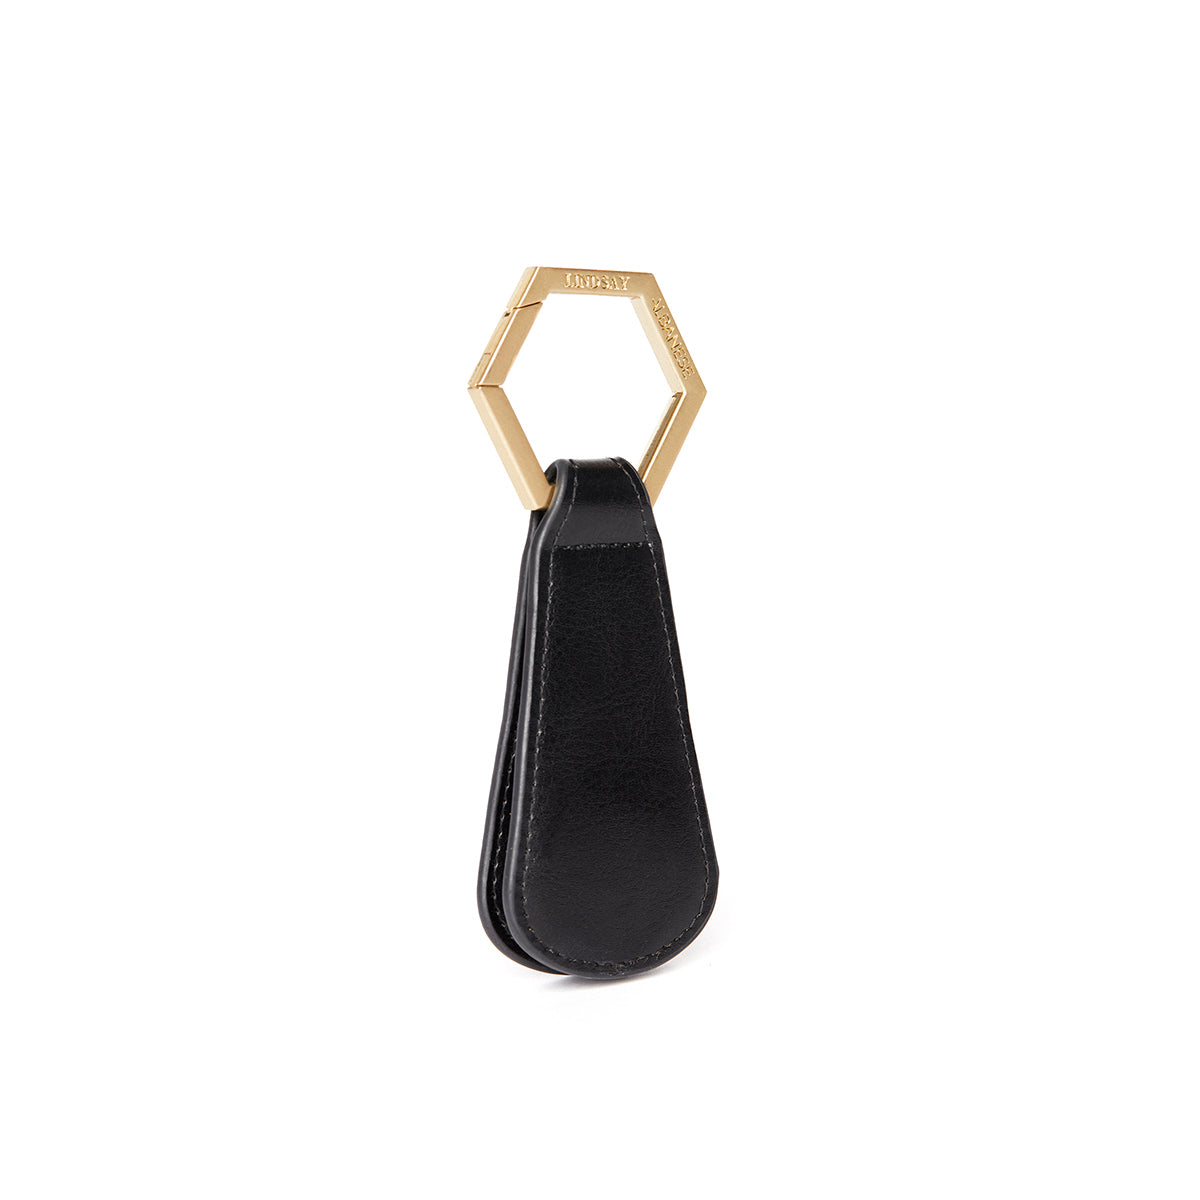 The Drop TOPTOTE hat clip comes in faux leather made from cactus with brushed gold hardware 